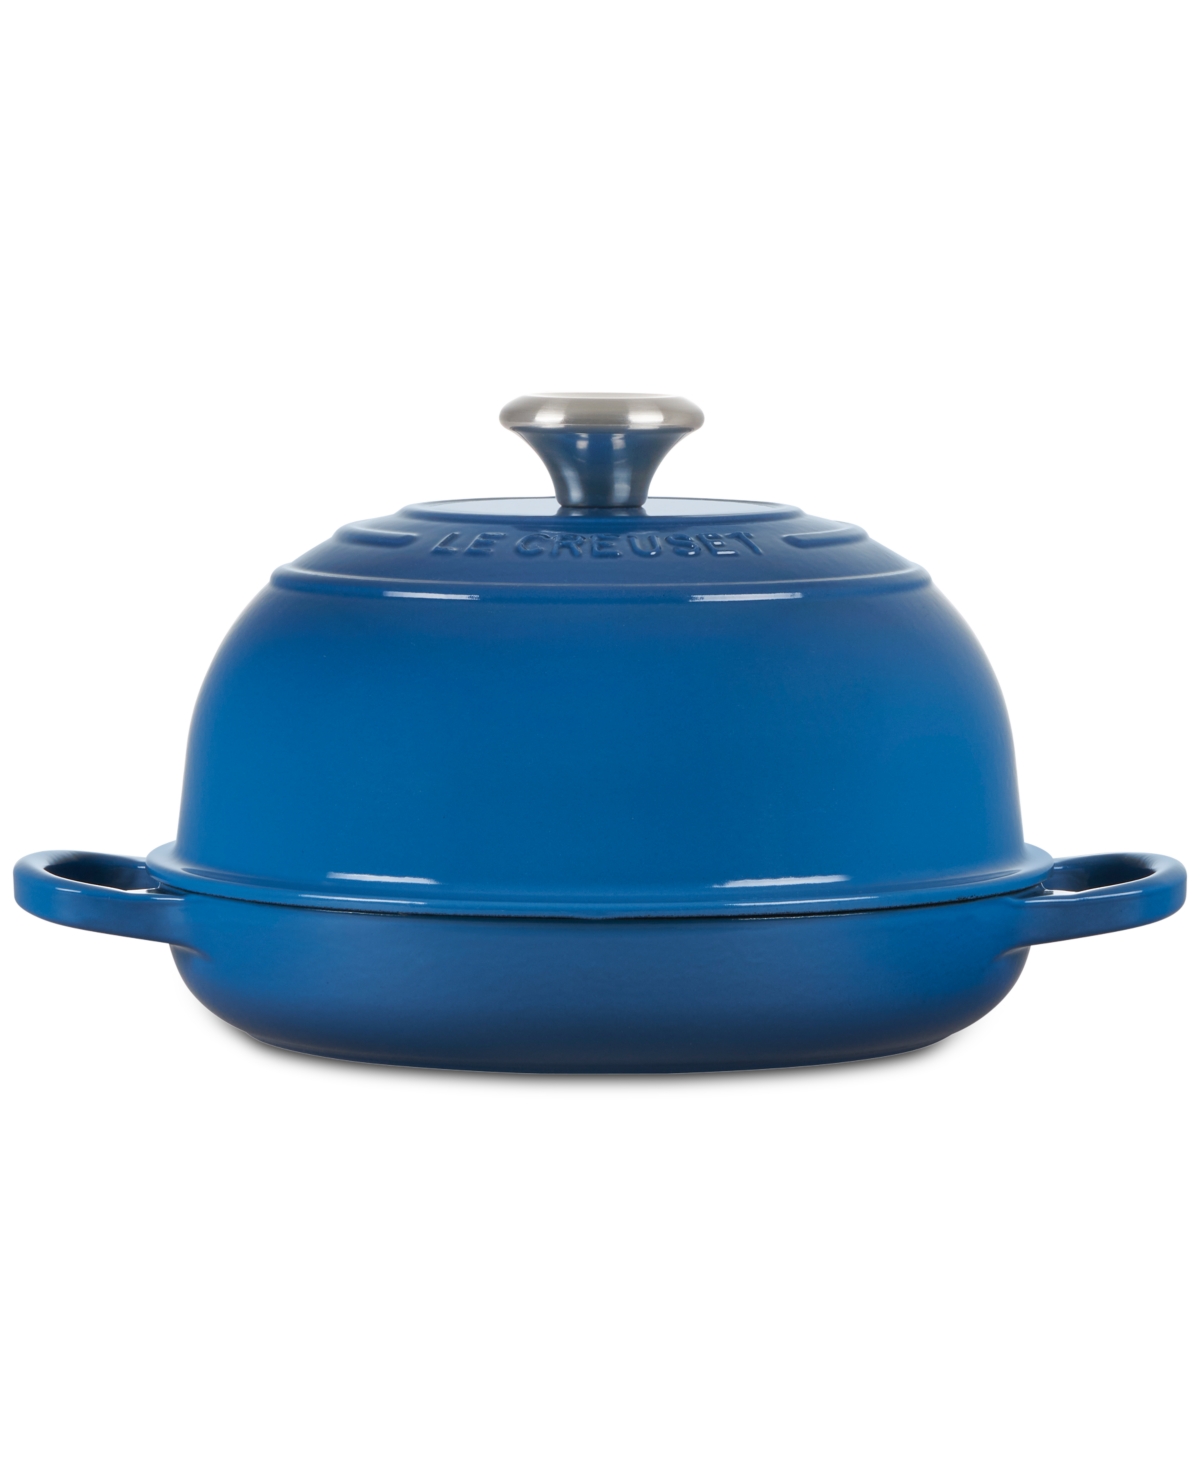 Le Creuset 1.75 Qt Enameled Cast Iron Bread Oven With Lid In Marseille